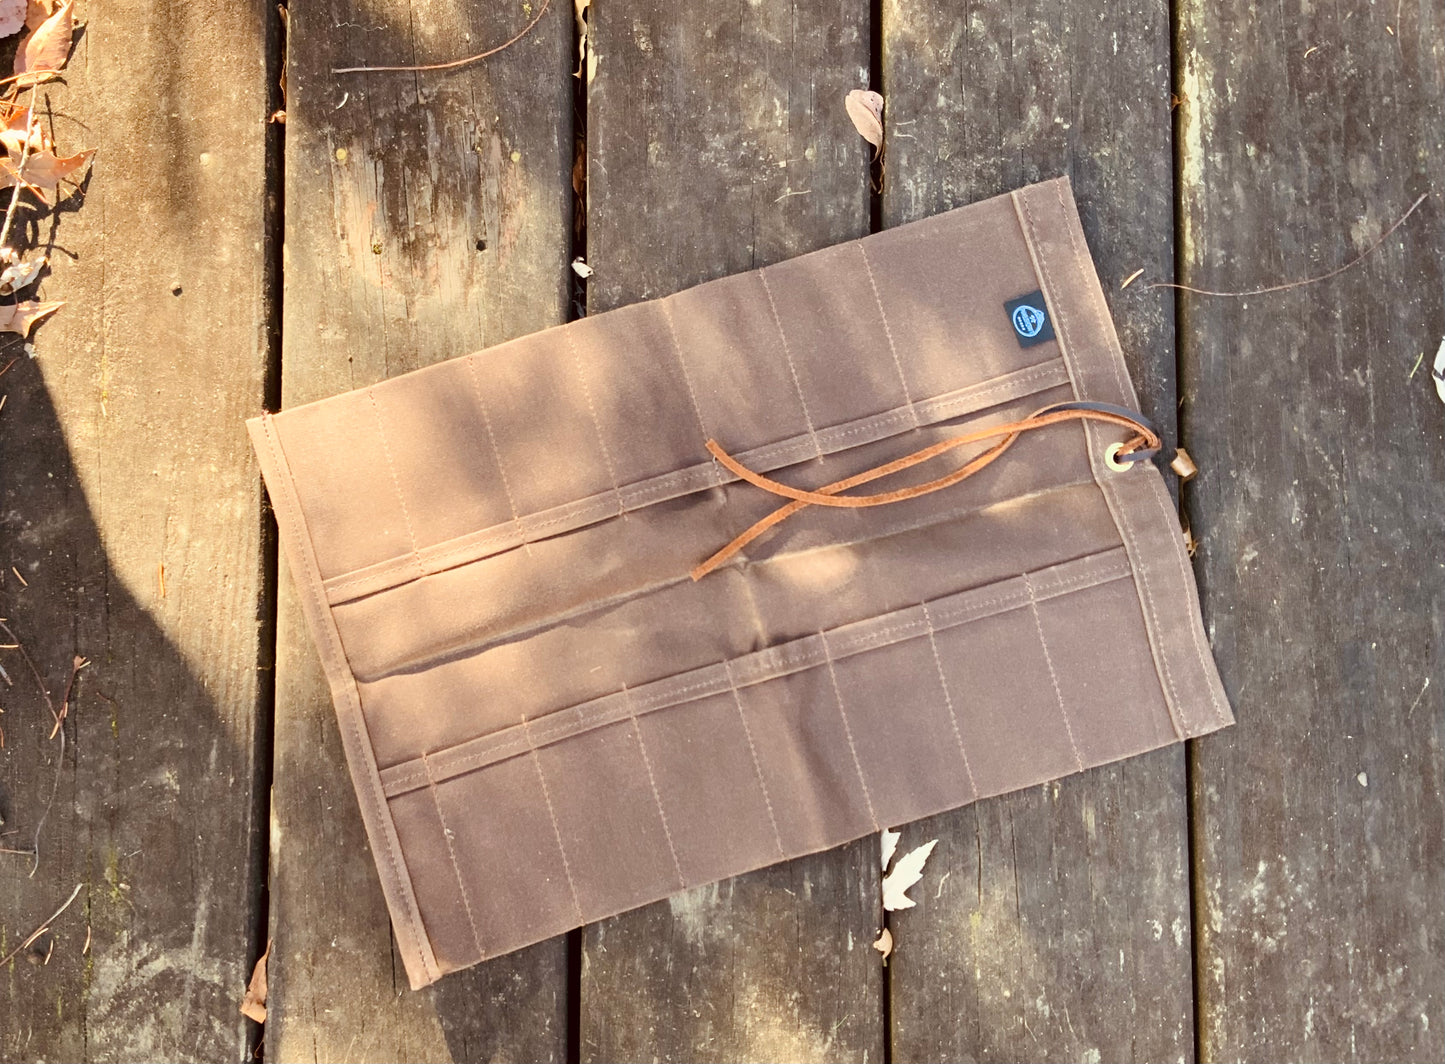 Maple Waxed Canvas 15 Pocket Tool Roll shown in brown